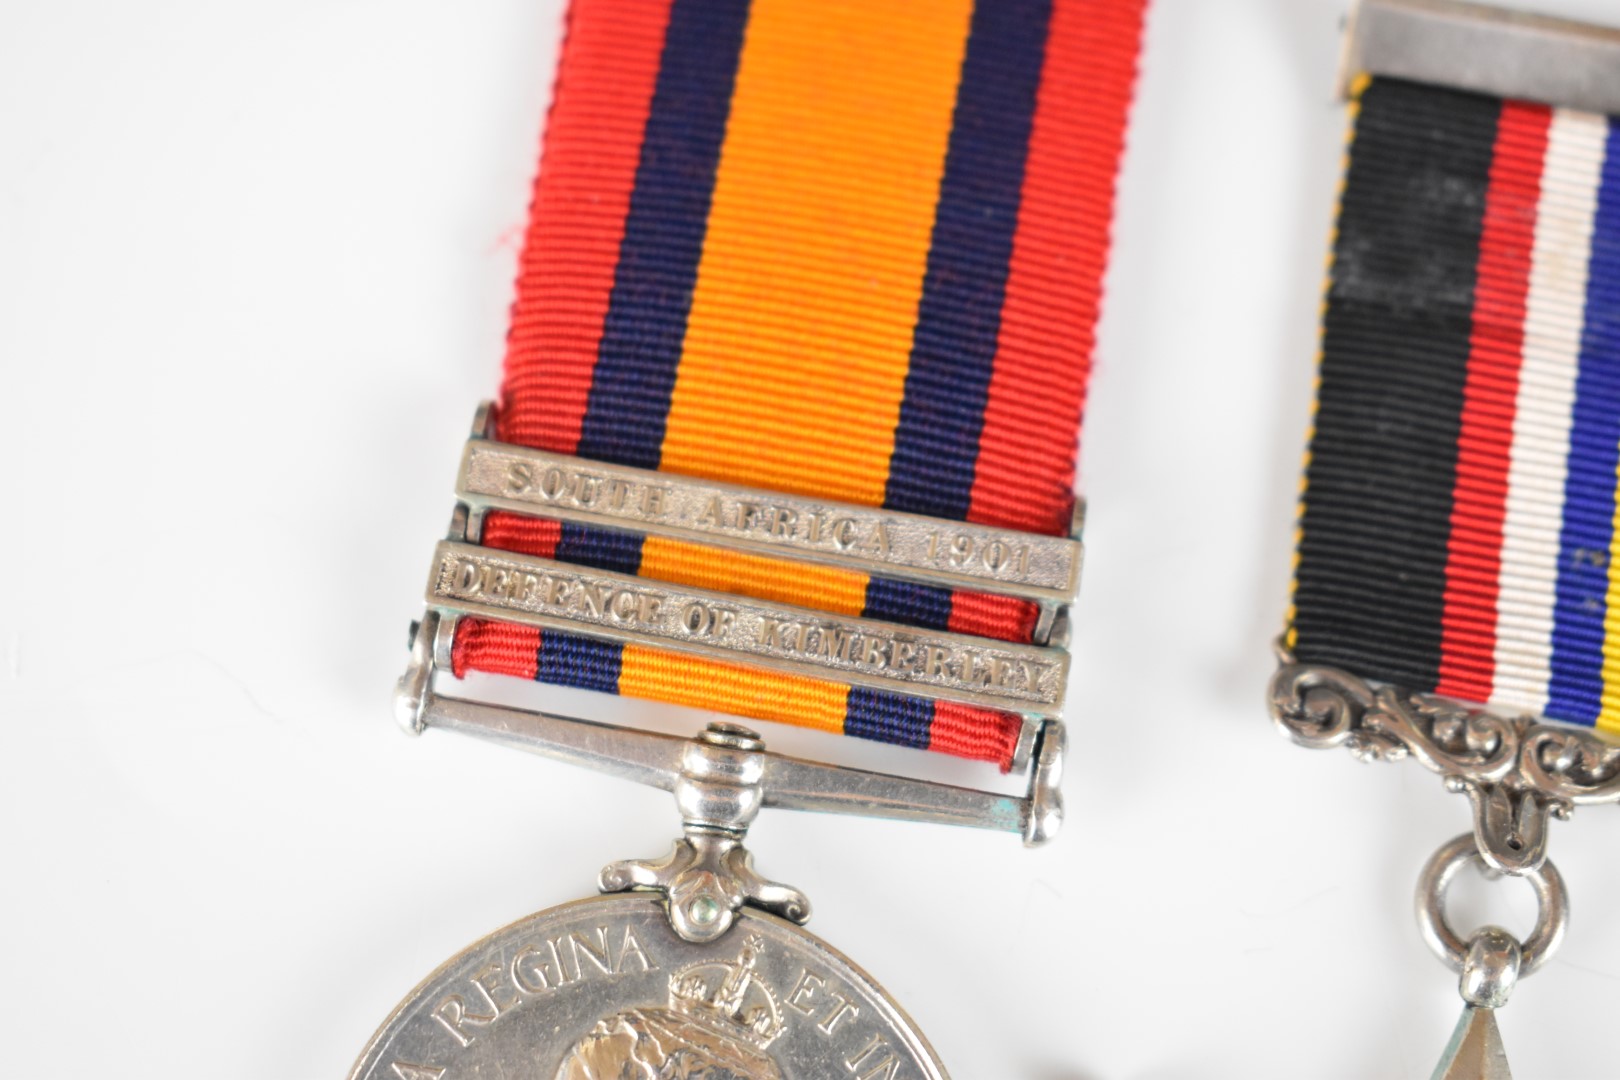 Queen's South Africa Medal with clasps for Defence of Kimberley and South Africa 1901 named to 828 - Image 4 of 22